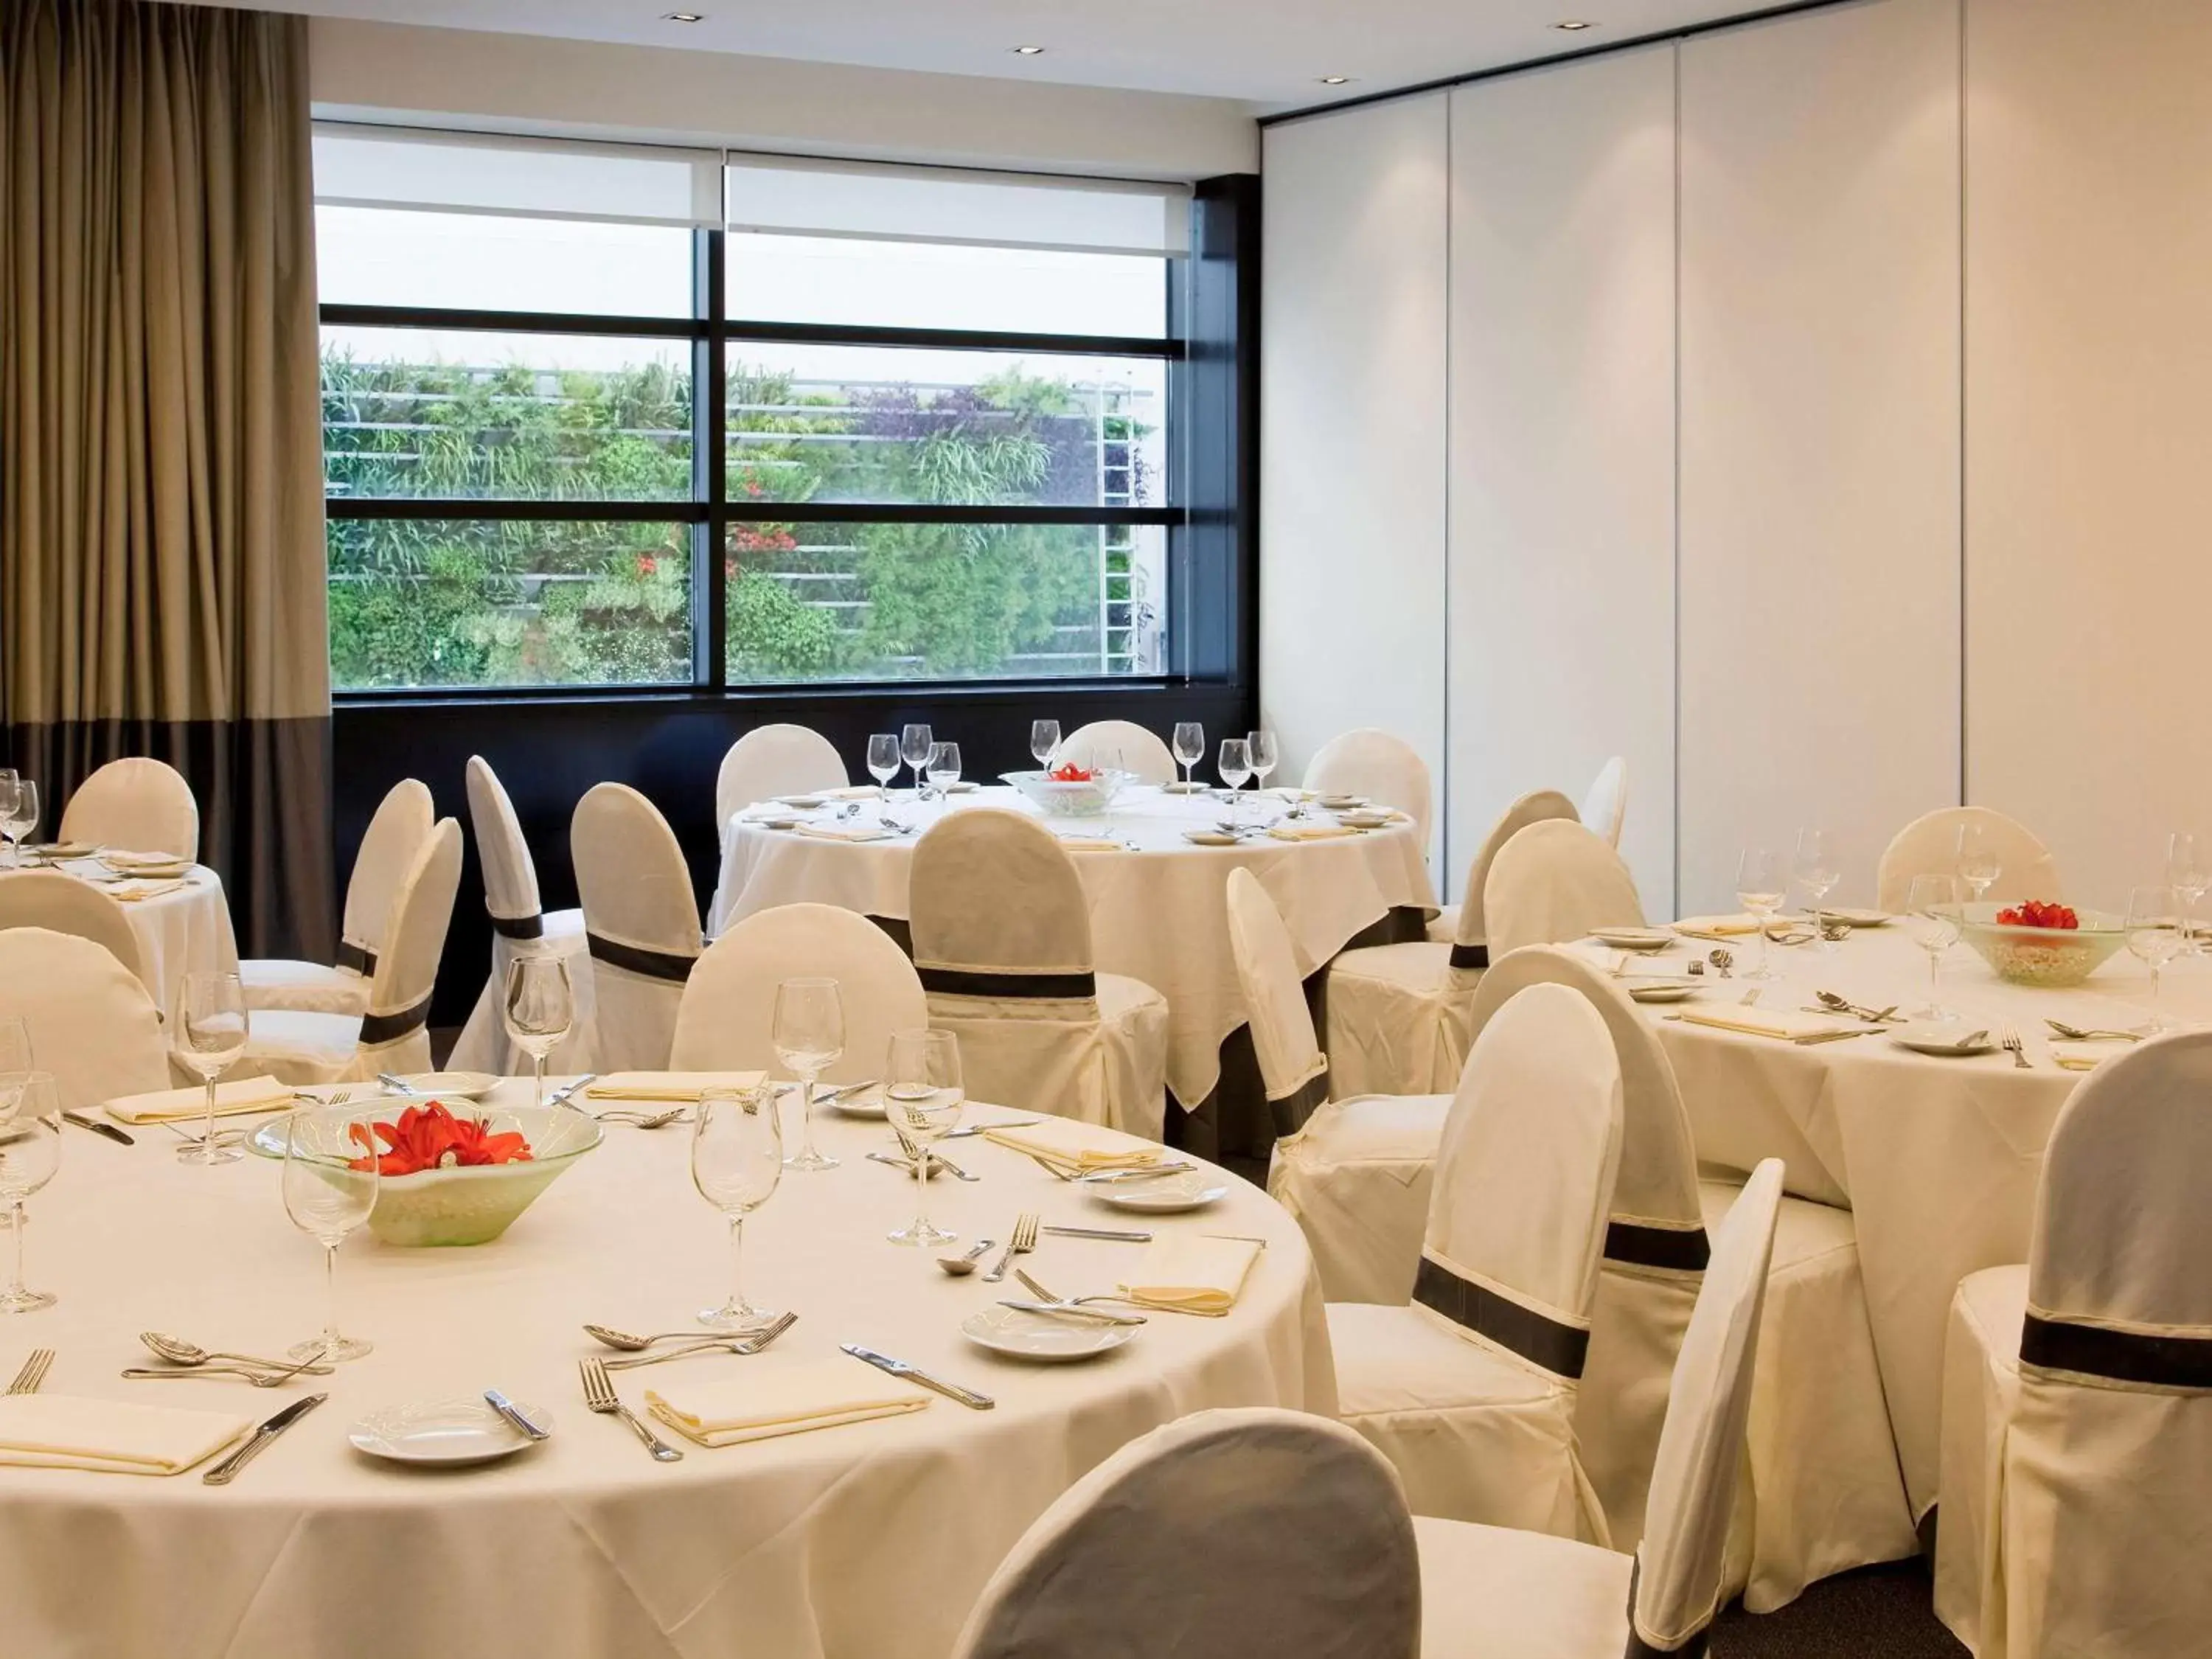 On site, Banquet Facilities in Novotel Buenos Aires